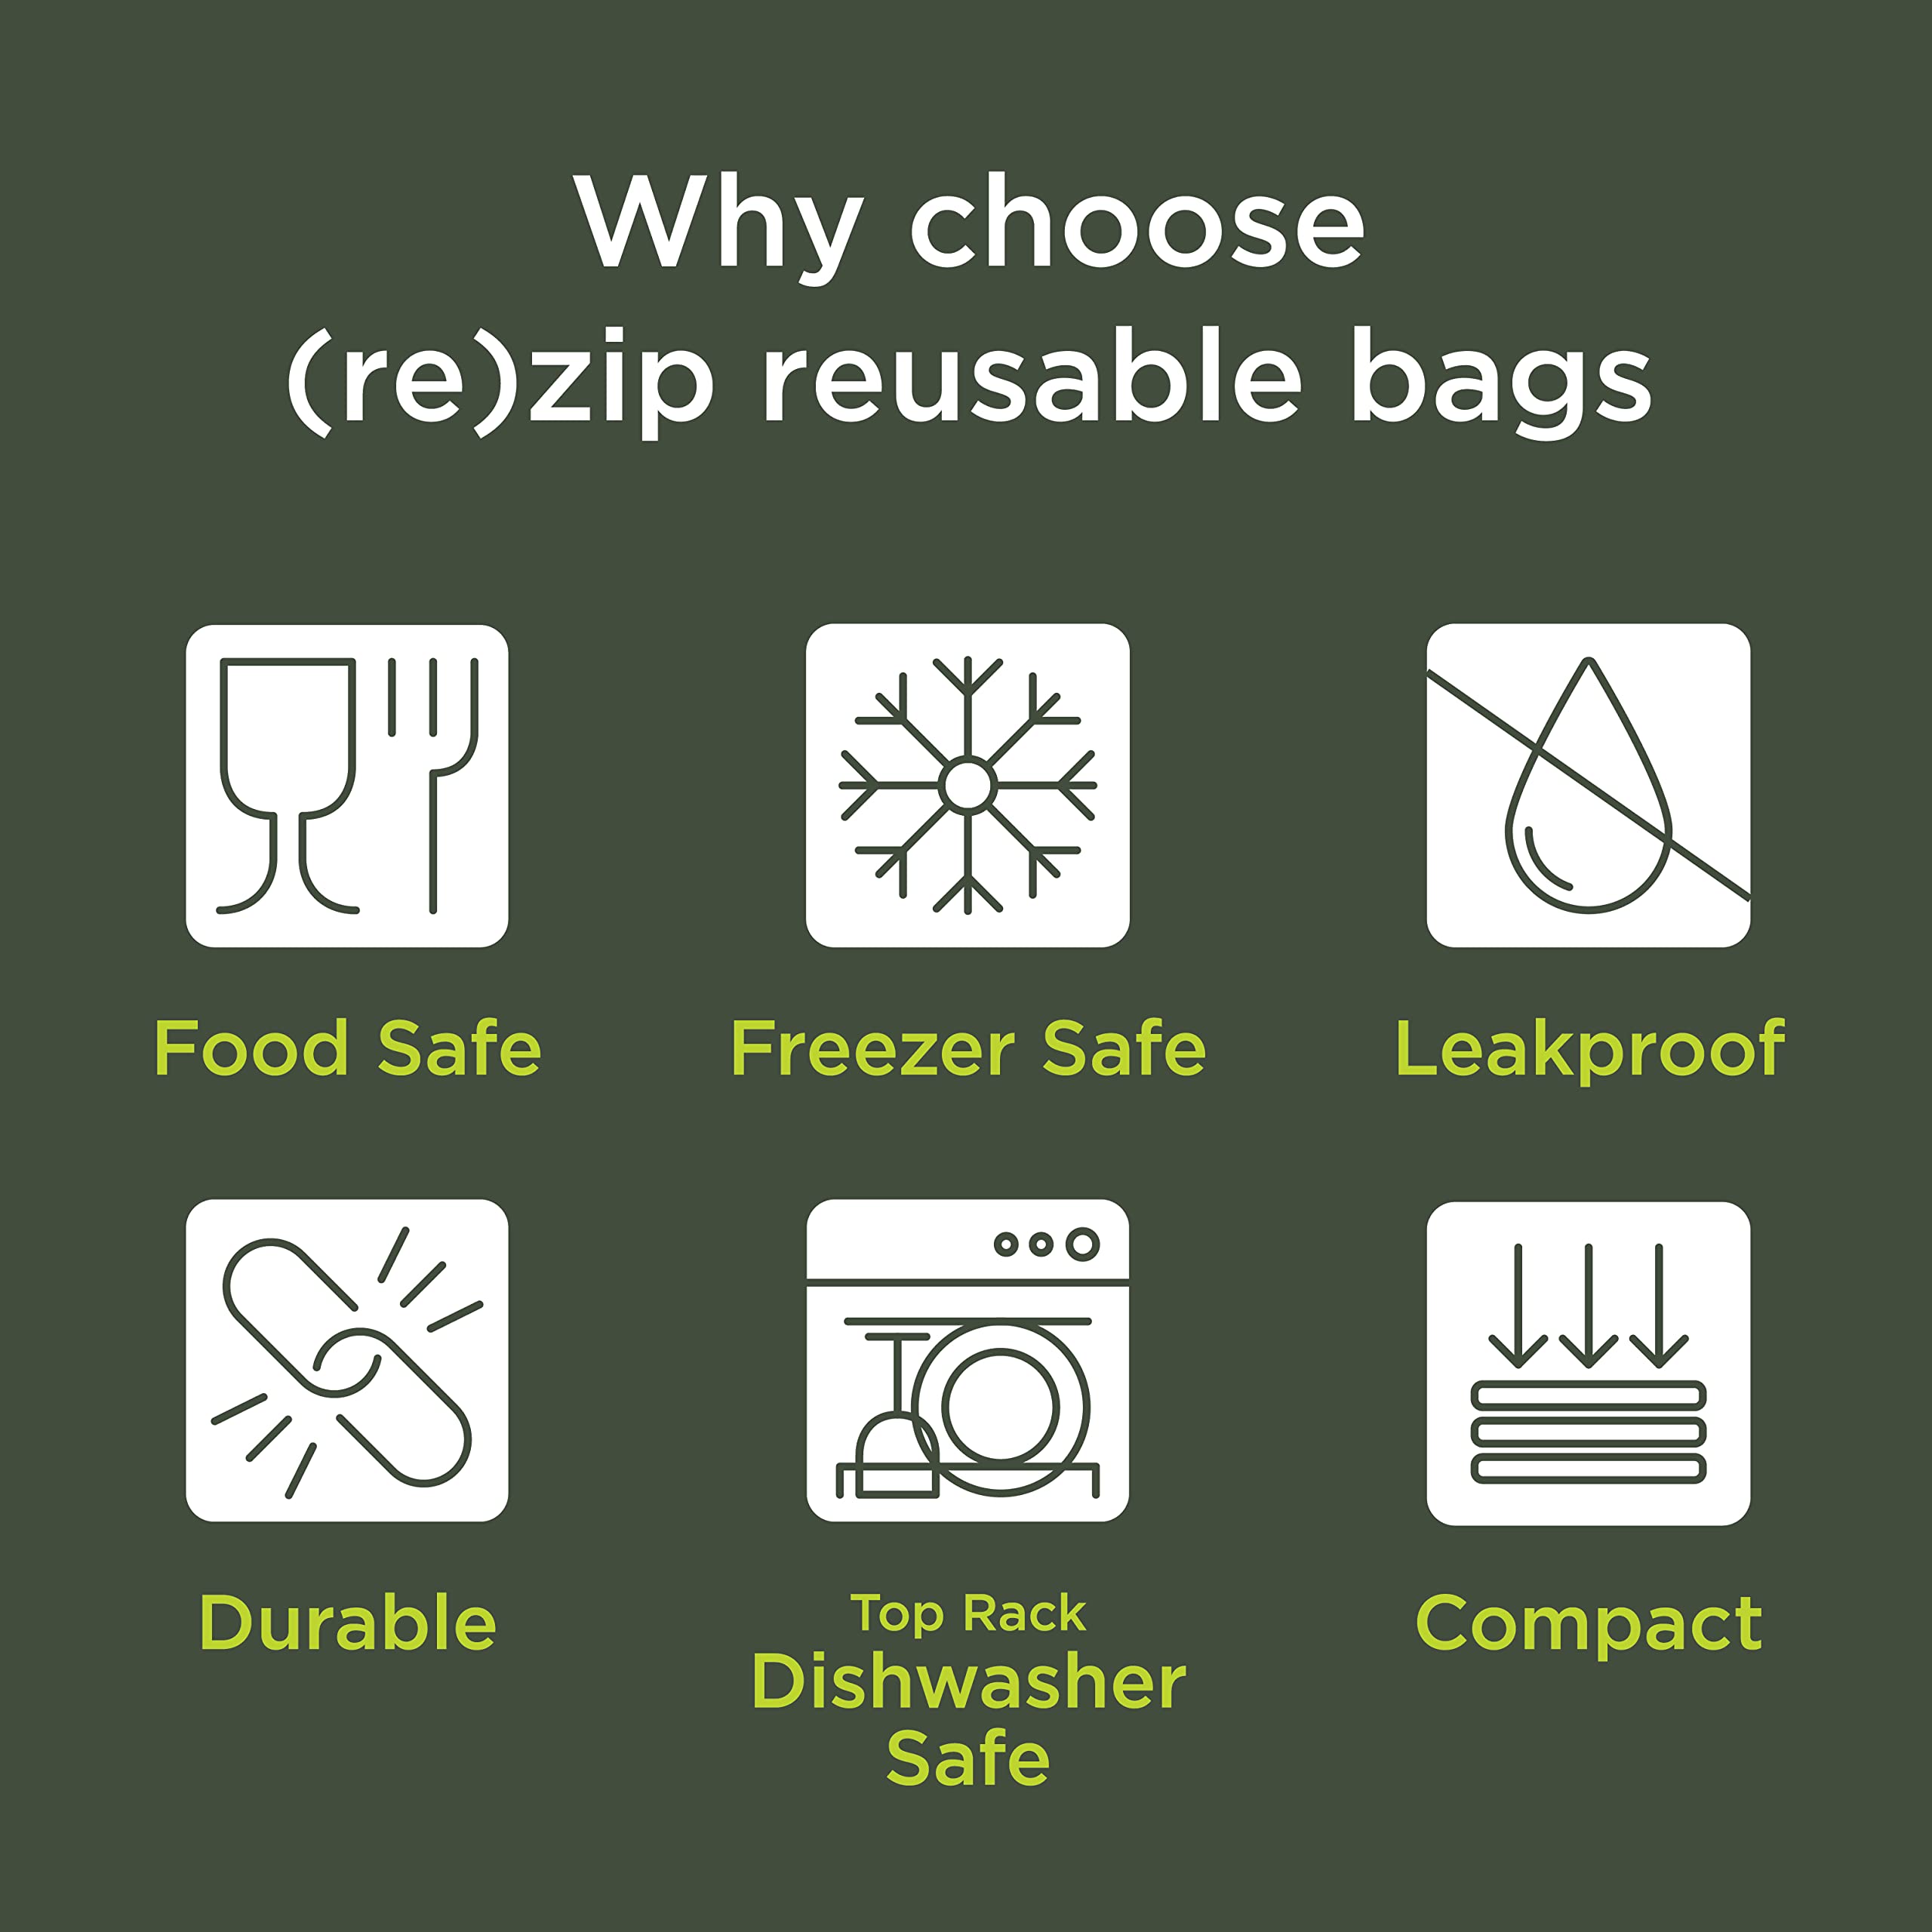 rezip 10-Pack Flat Reusable Lunch Bags | BPA-Free, Food Grade, Leakproof, Freezer and Dishwasher Safe | 10 Sandwich/Lunch Bags (3.5 Cup / 28-Ounce) | Clear